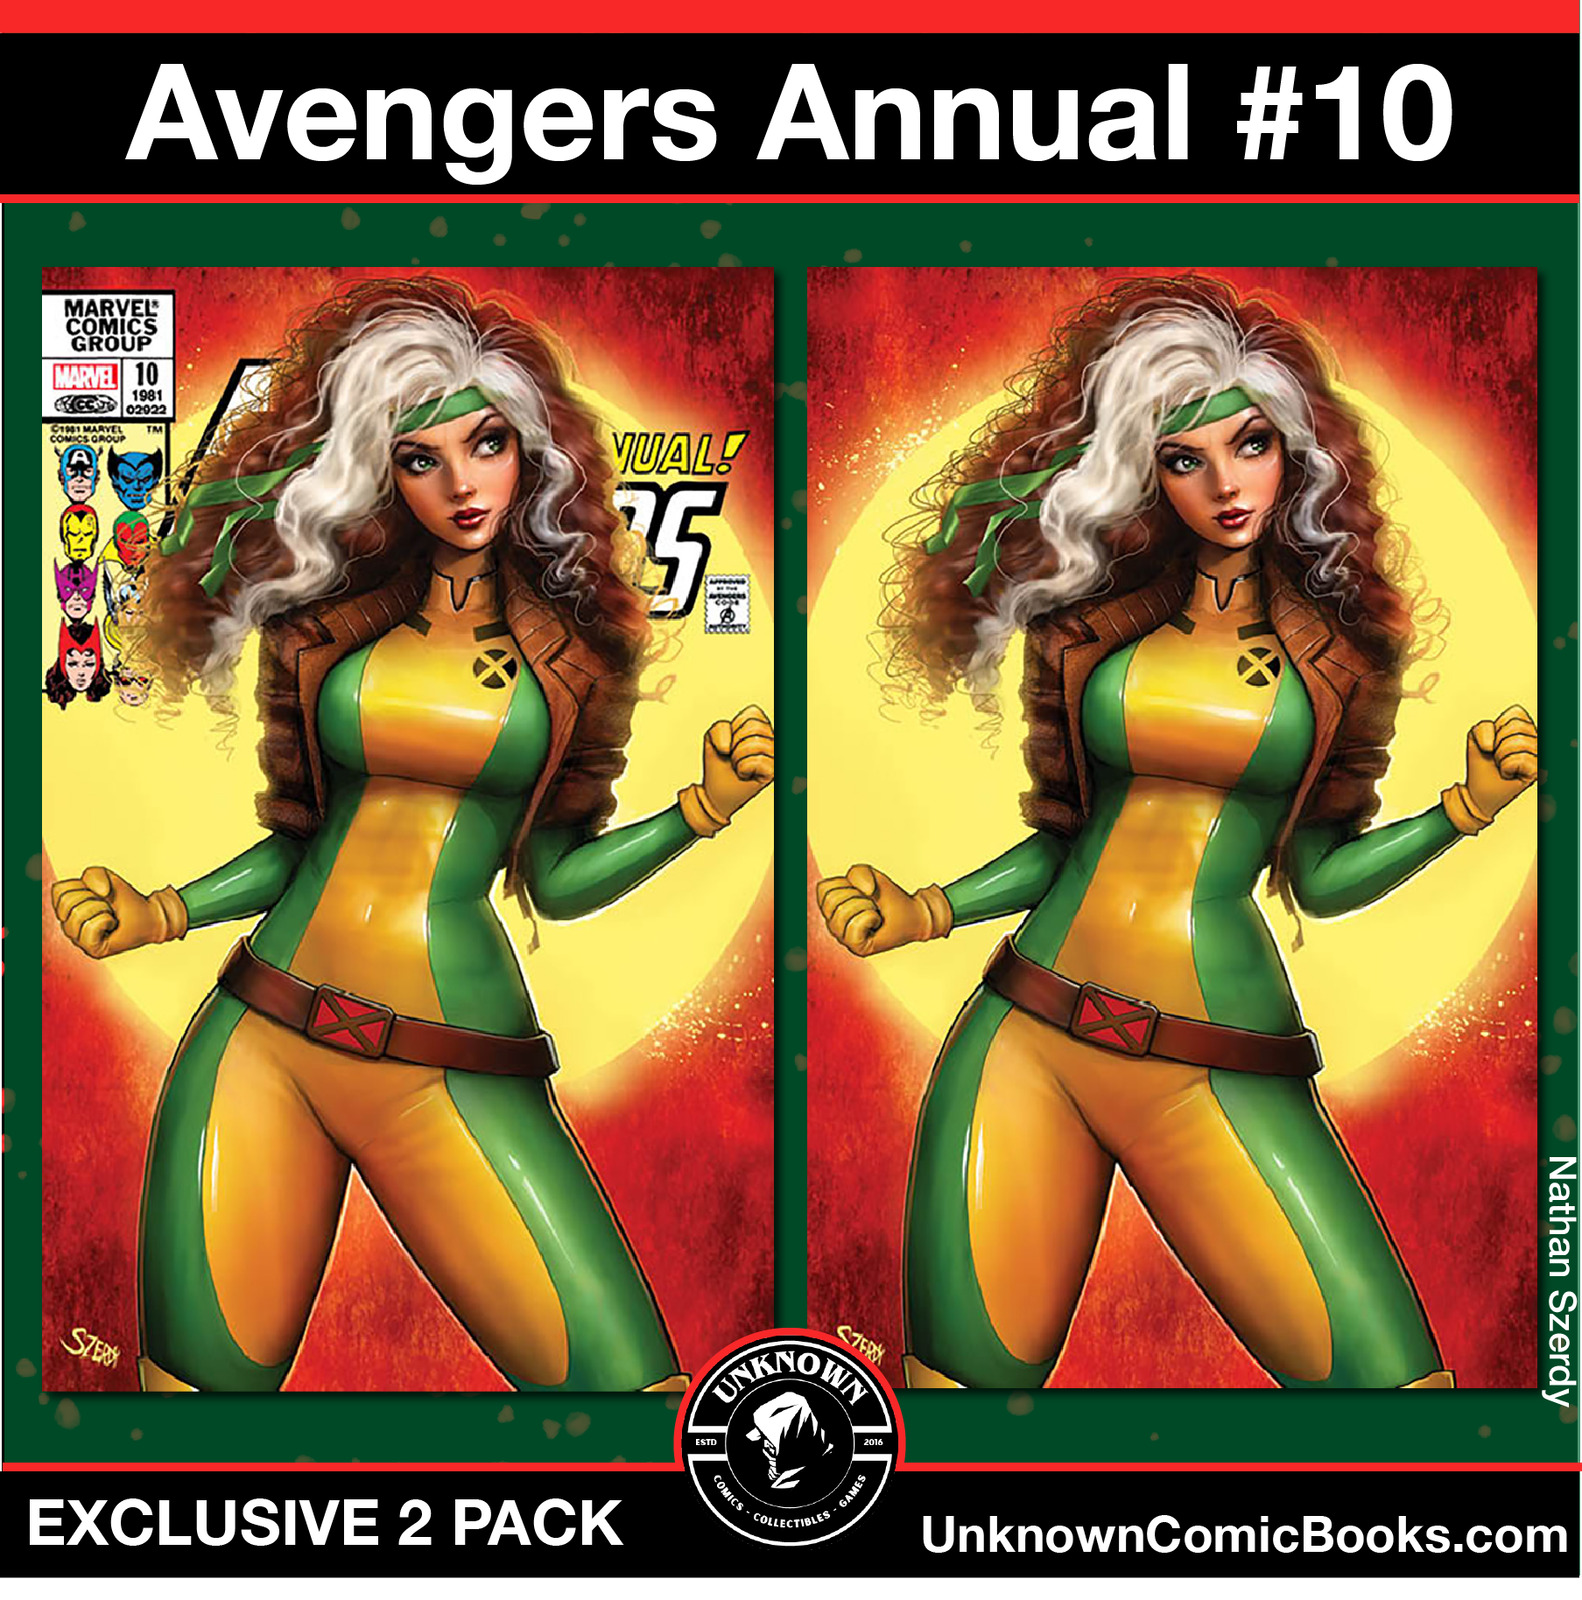 [2 PACK] AVENGERS ANNUAL #10 UNKNOWN COMICS NATHAN SZERDY EXCLUSIVE VAR FACSIMIL